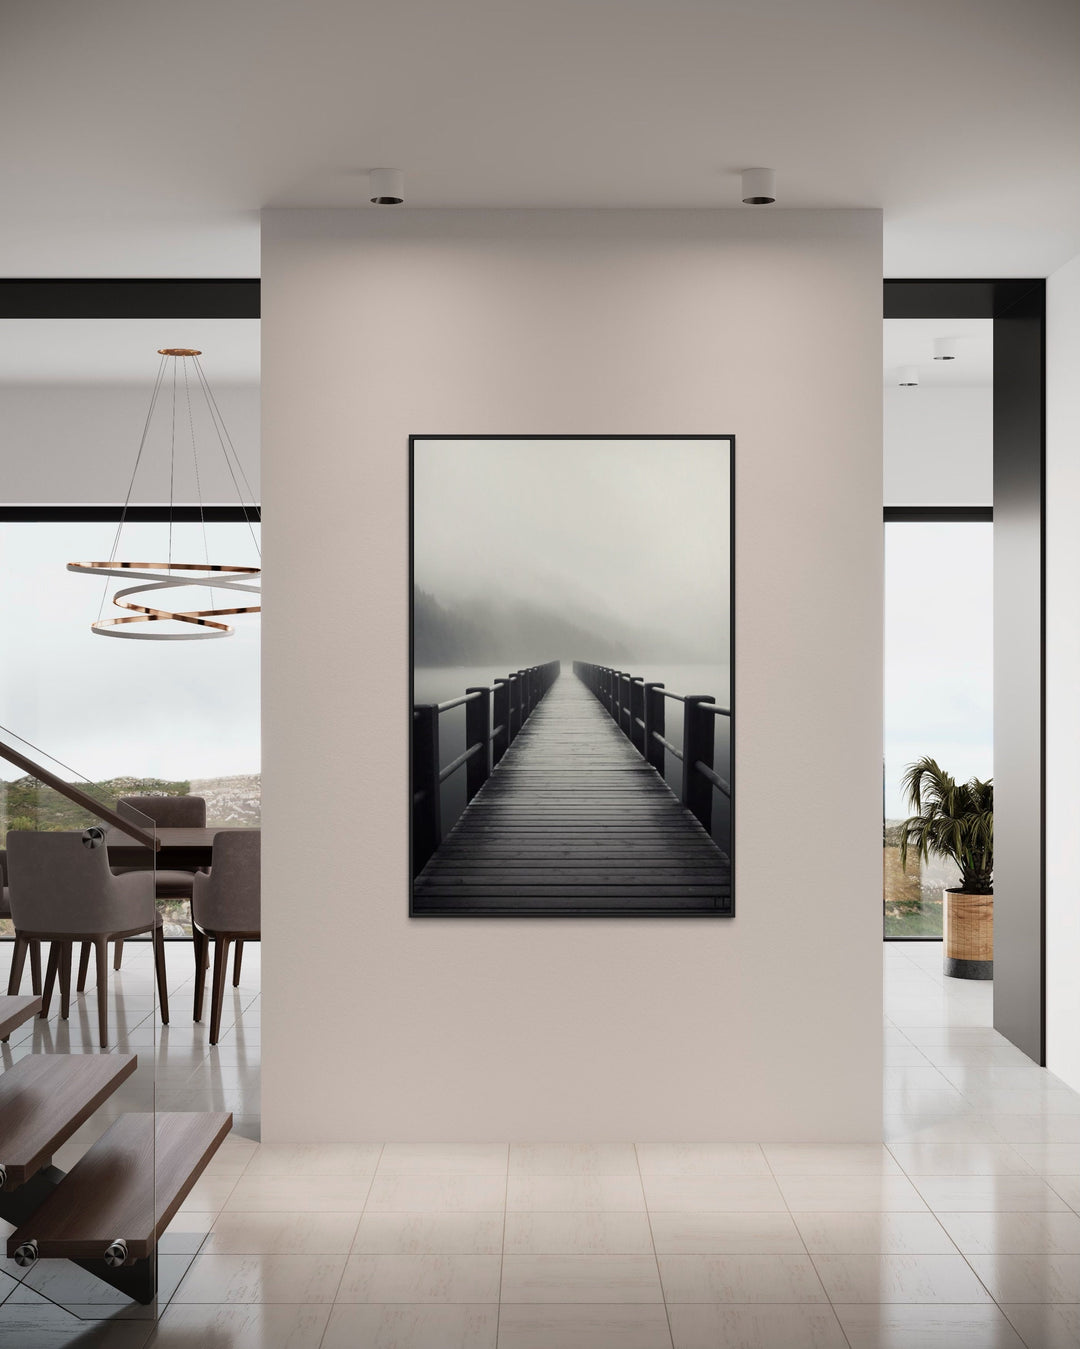 Foggy Black White Lake Landscape With Dock/Pier Framed Canvas Wall Art in modern home